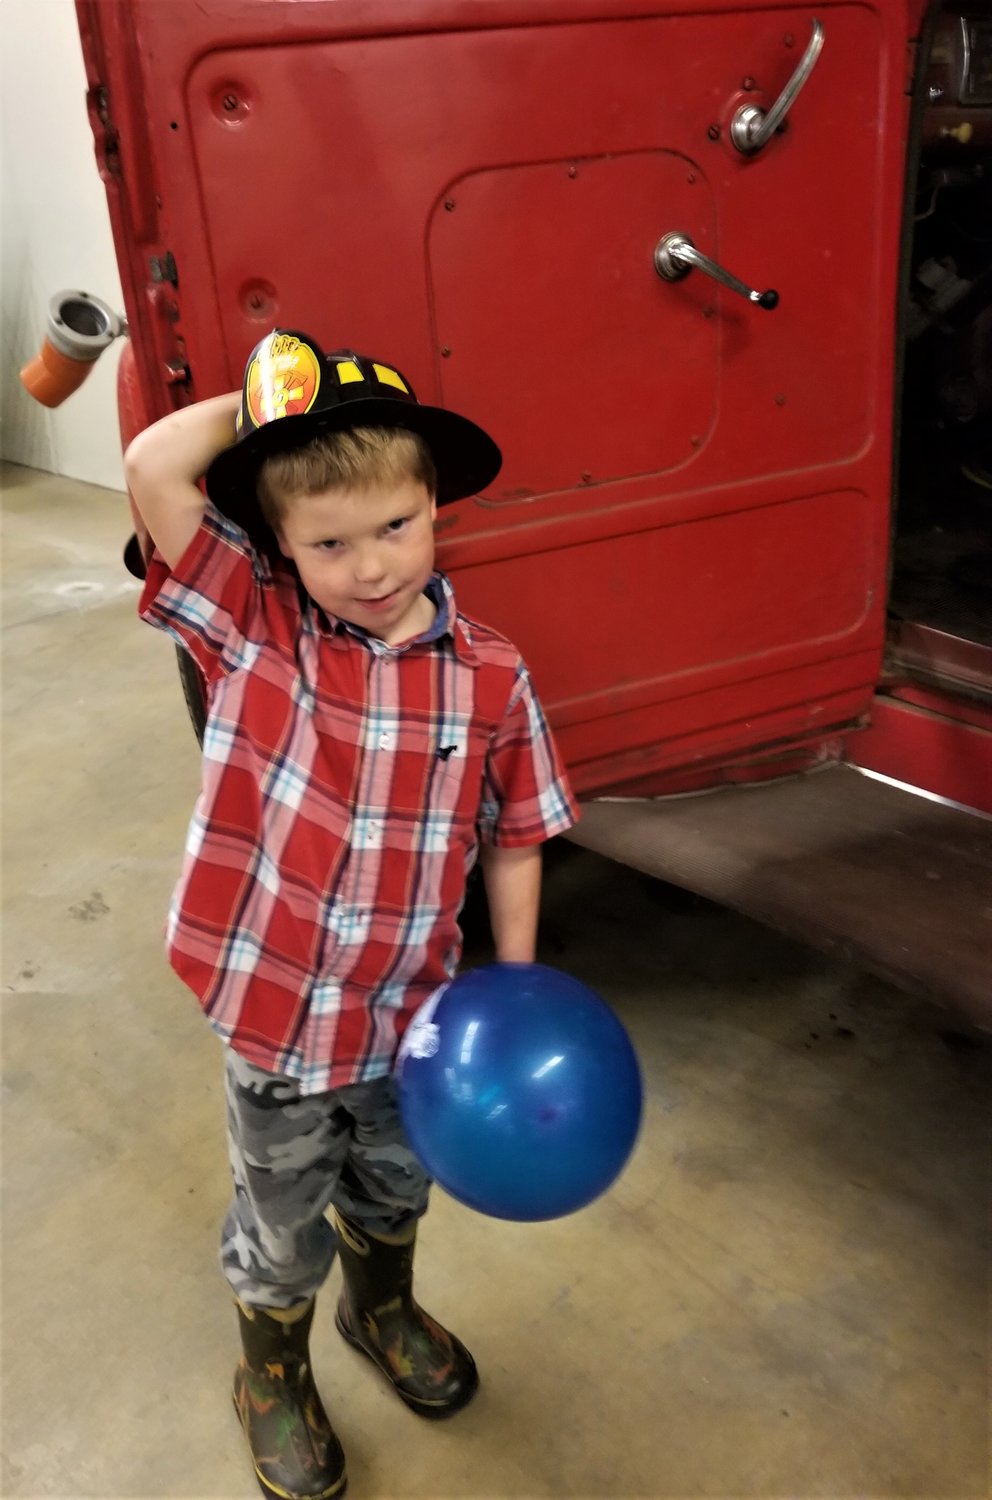 Evan Weckerling, son of Goodhue Fire Chief Derek Weckerling, enjoyed hanging out at the fire hall during the open house fund raising event on October 16th. 